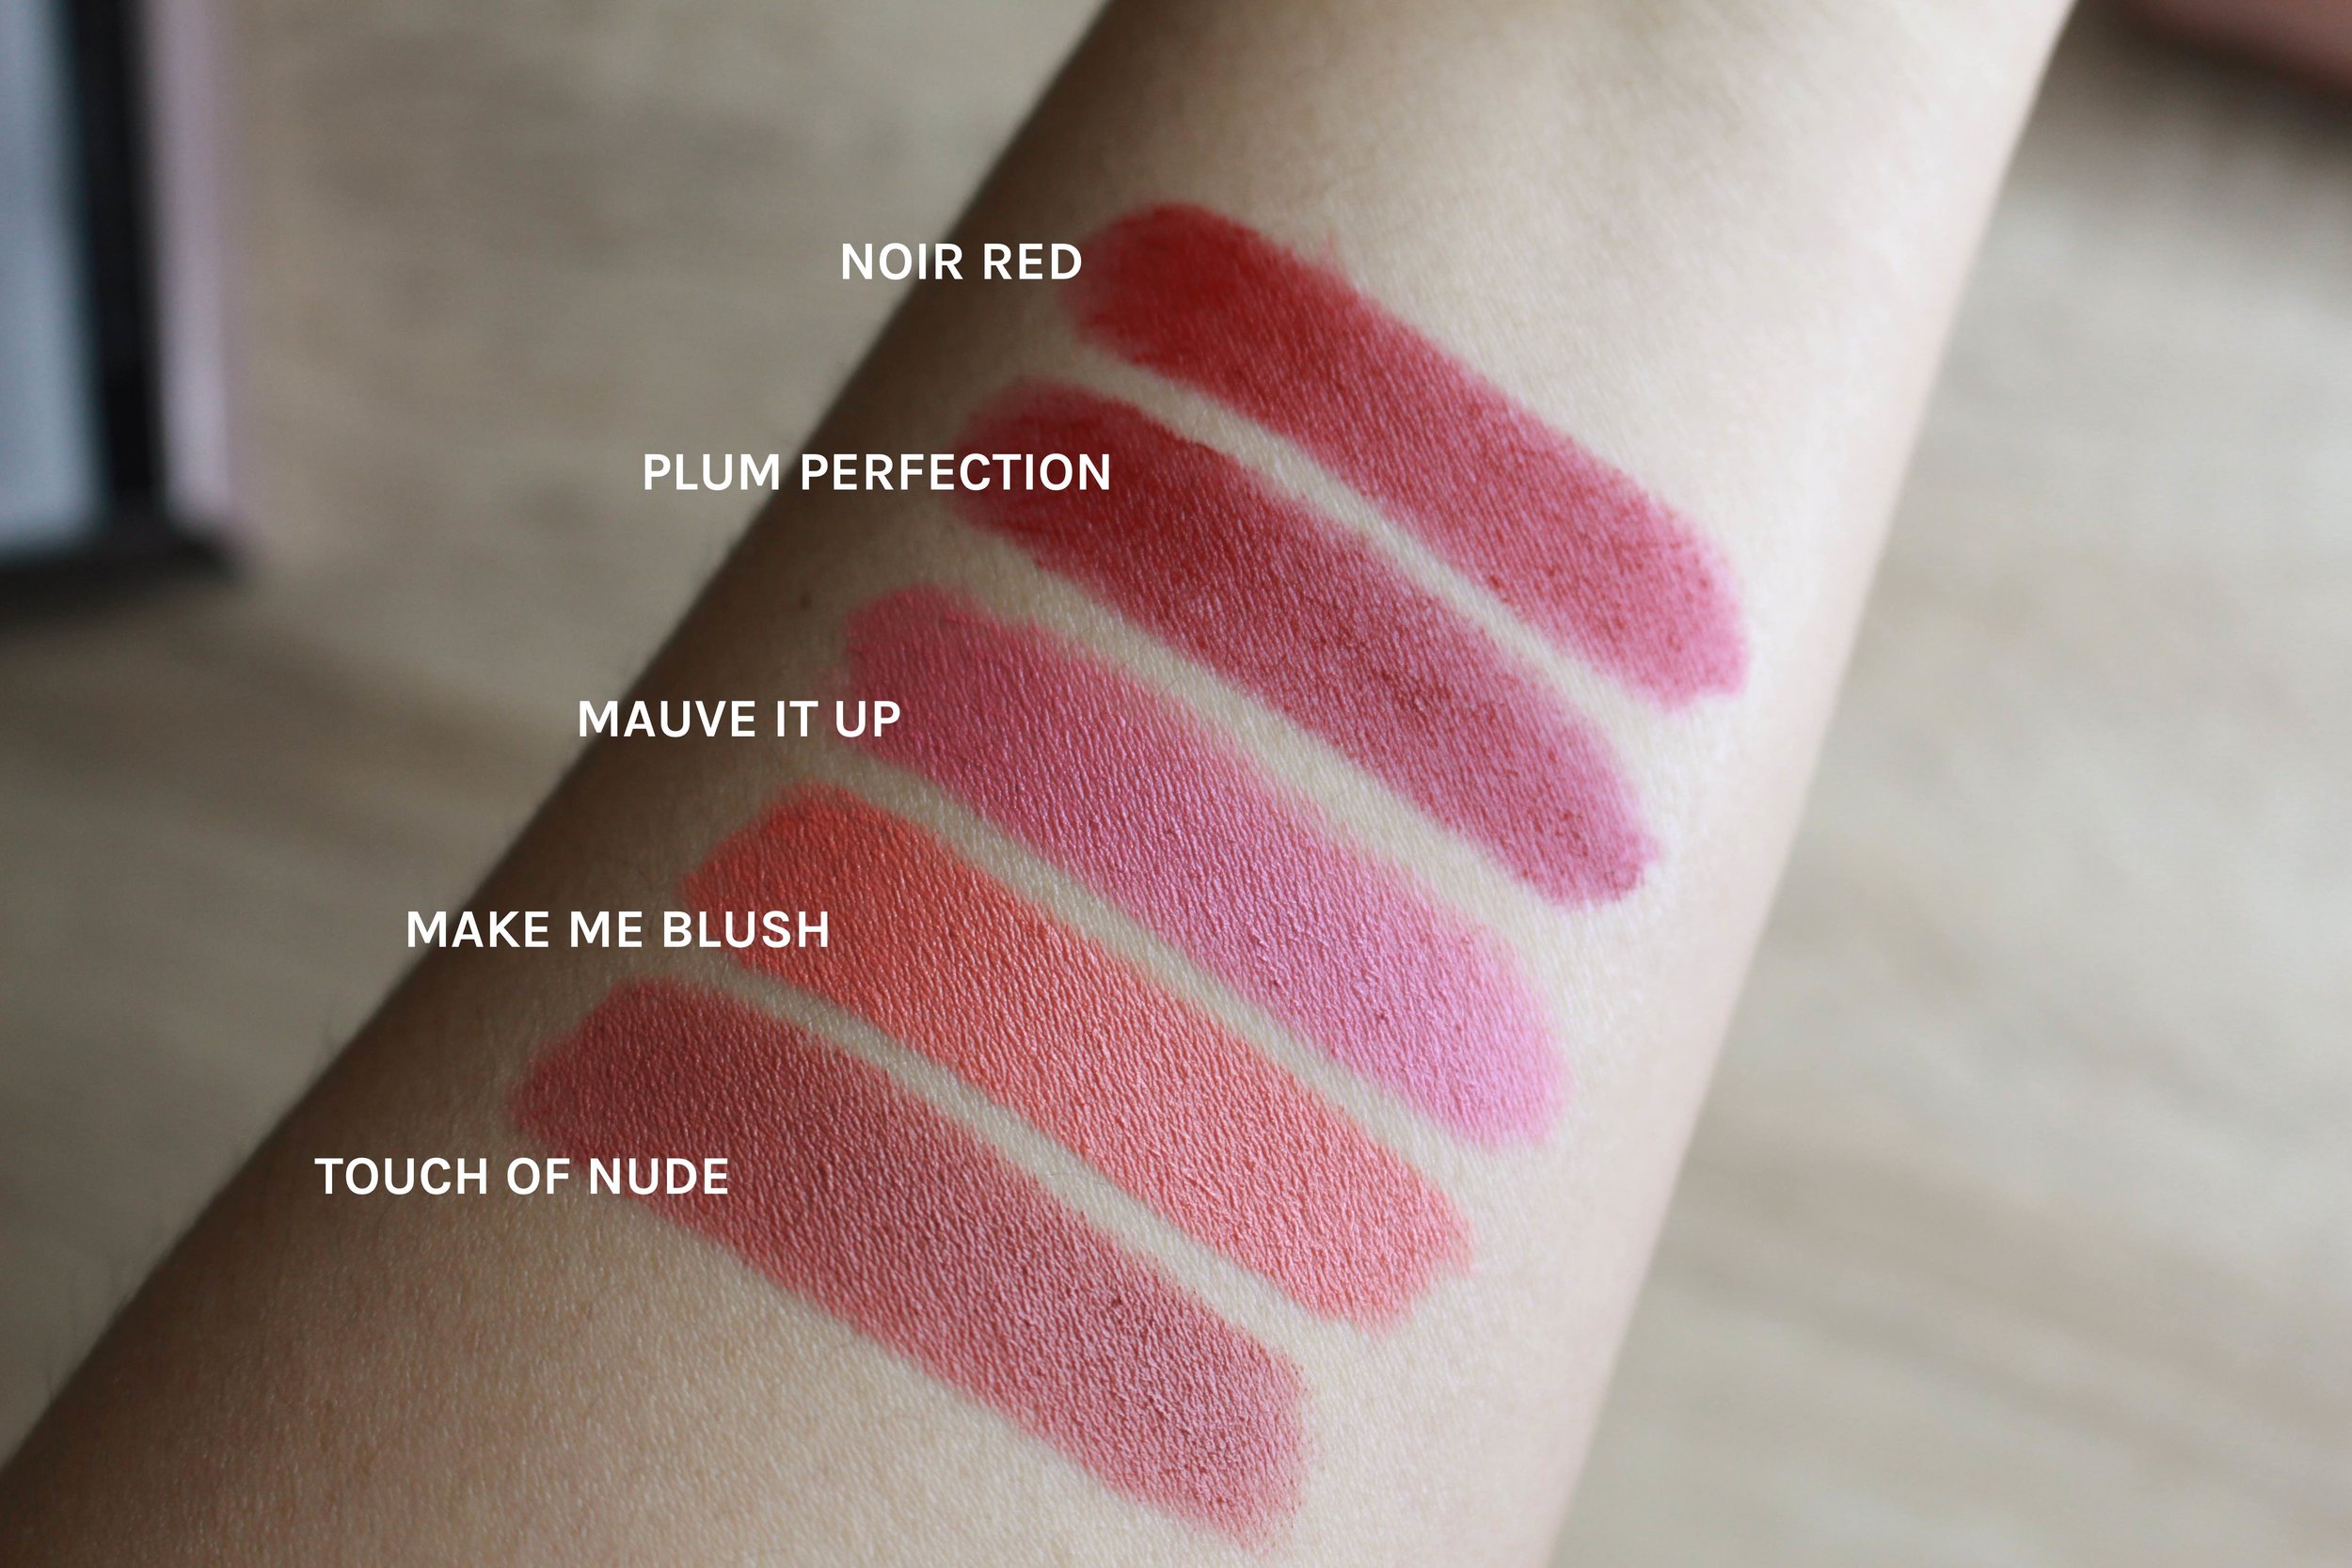 Jul 5 Review + Swatches: The Maybelline Powder Matte Lipstick.